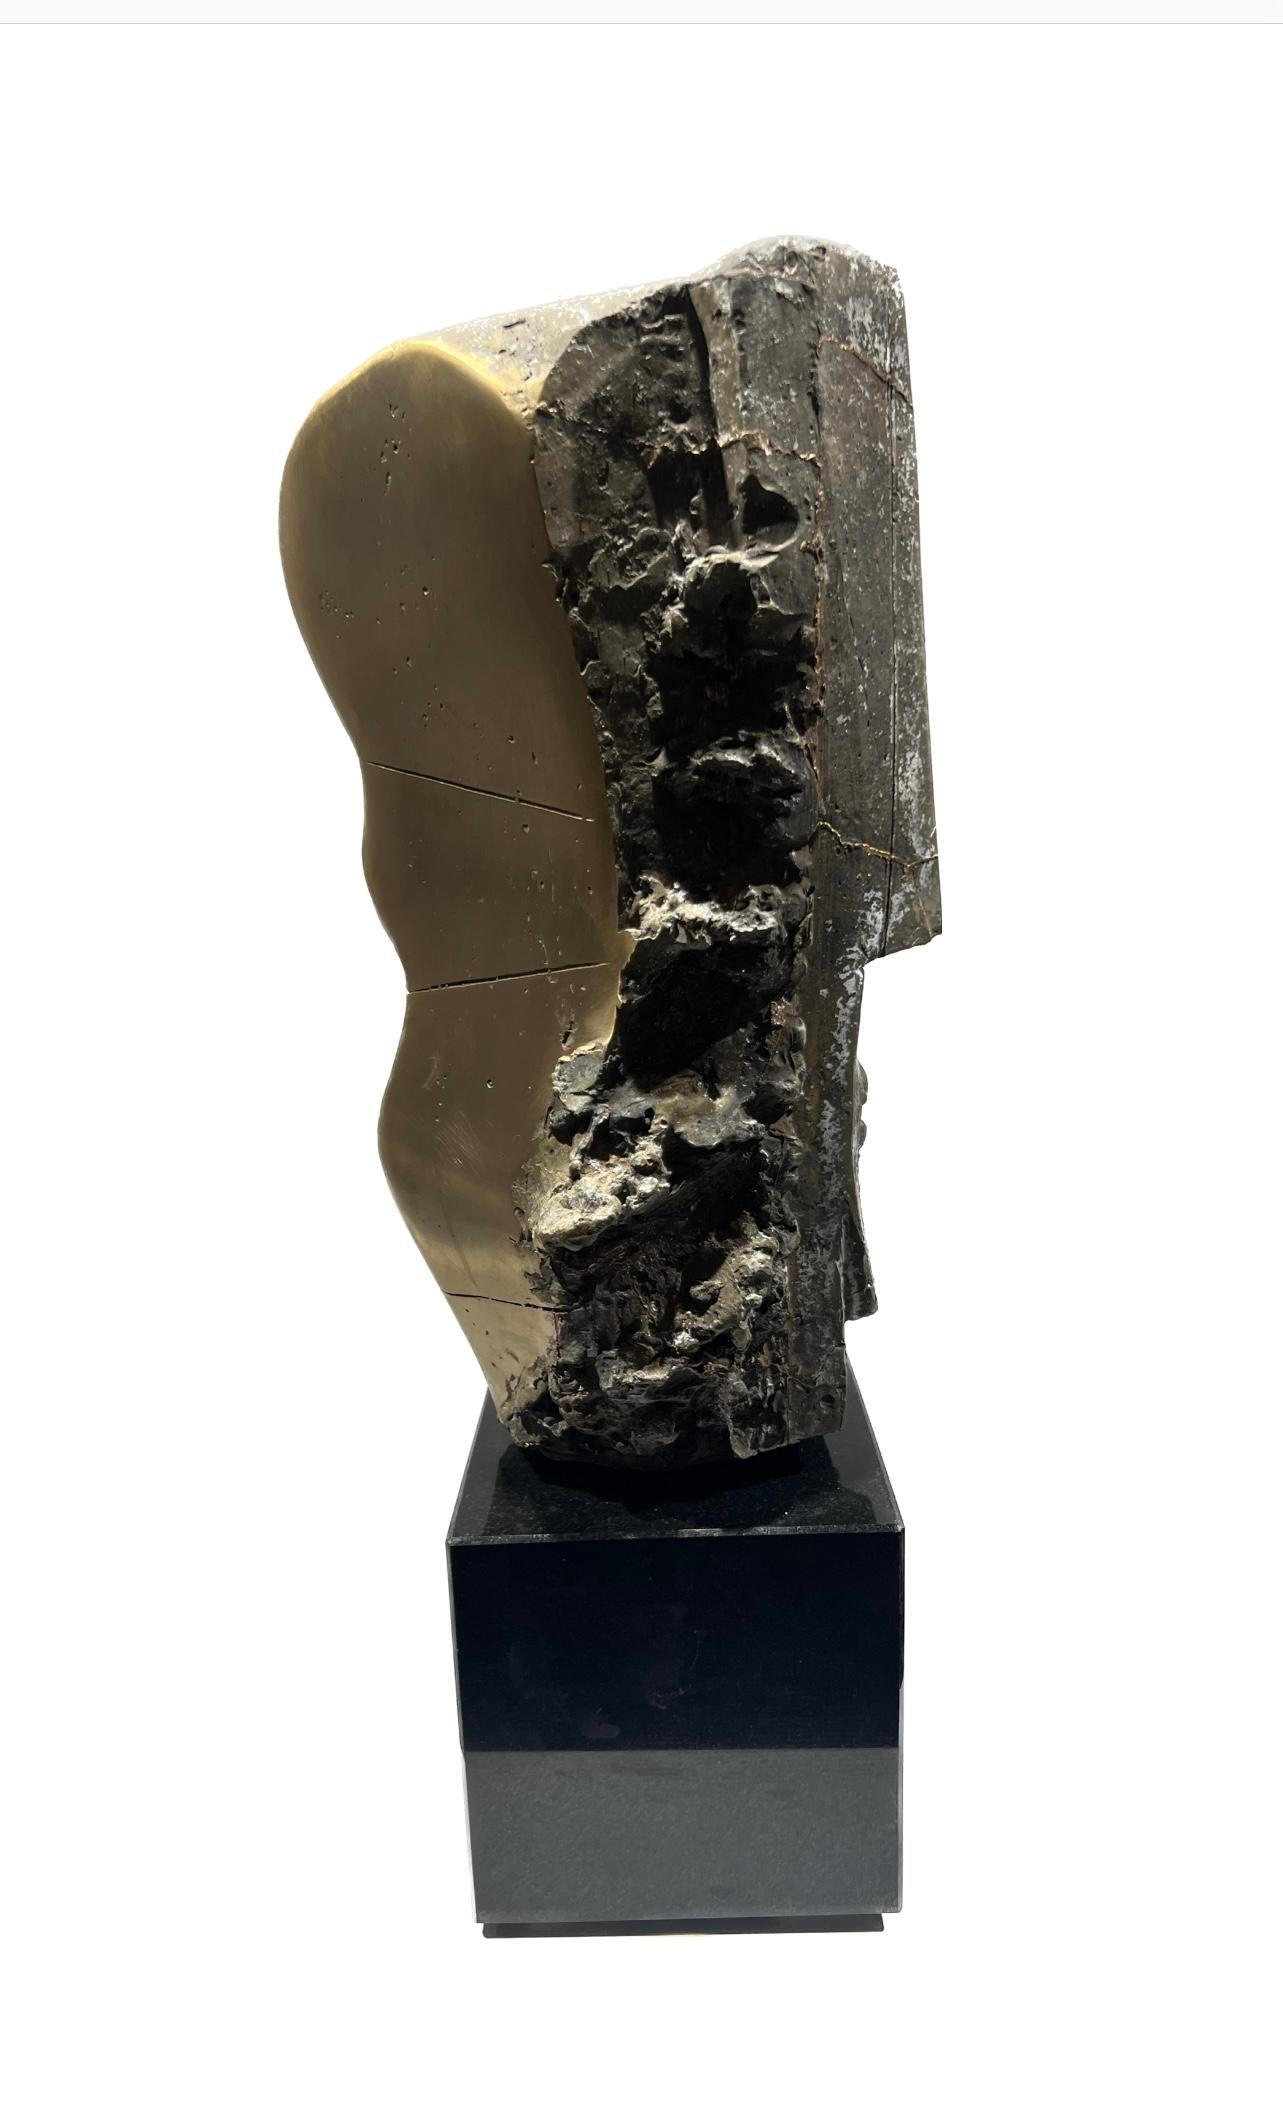 Father ( Casted 2023) Bronze Sculpture Abstract Portrait In Stock. Every Edition of Casting is different, so each sculpture is unique

Junghans (1956, Recklinghausen) creates abstract sculptures in stone, wood and bronze, mostly torsos and primal